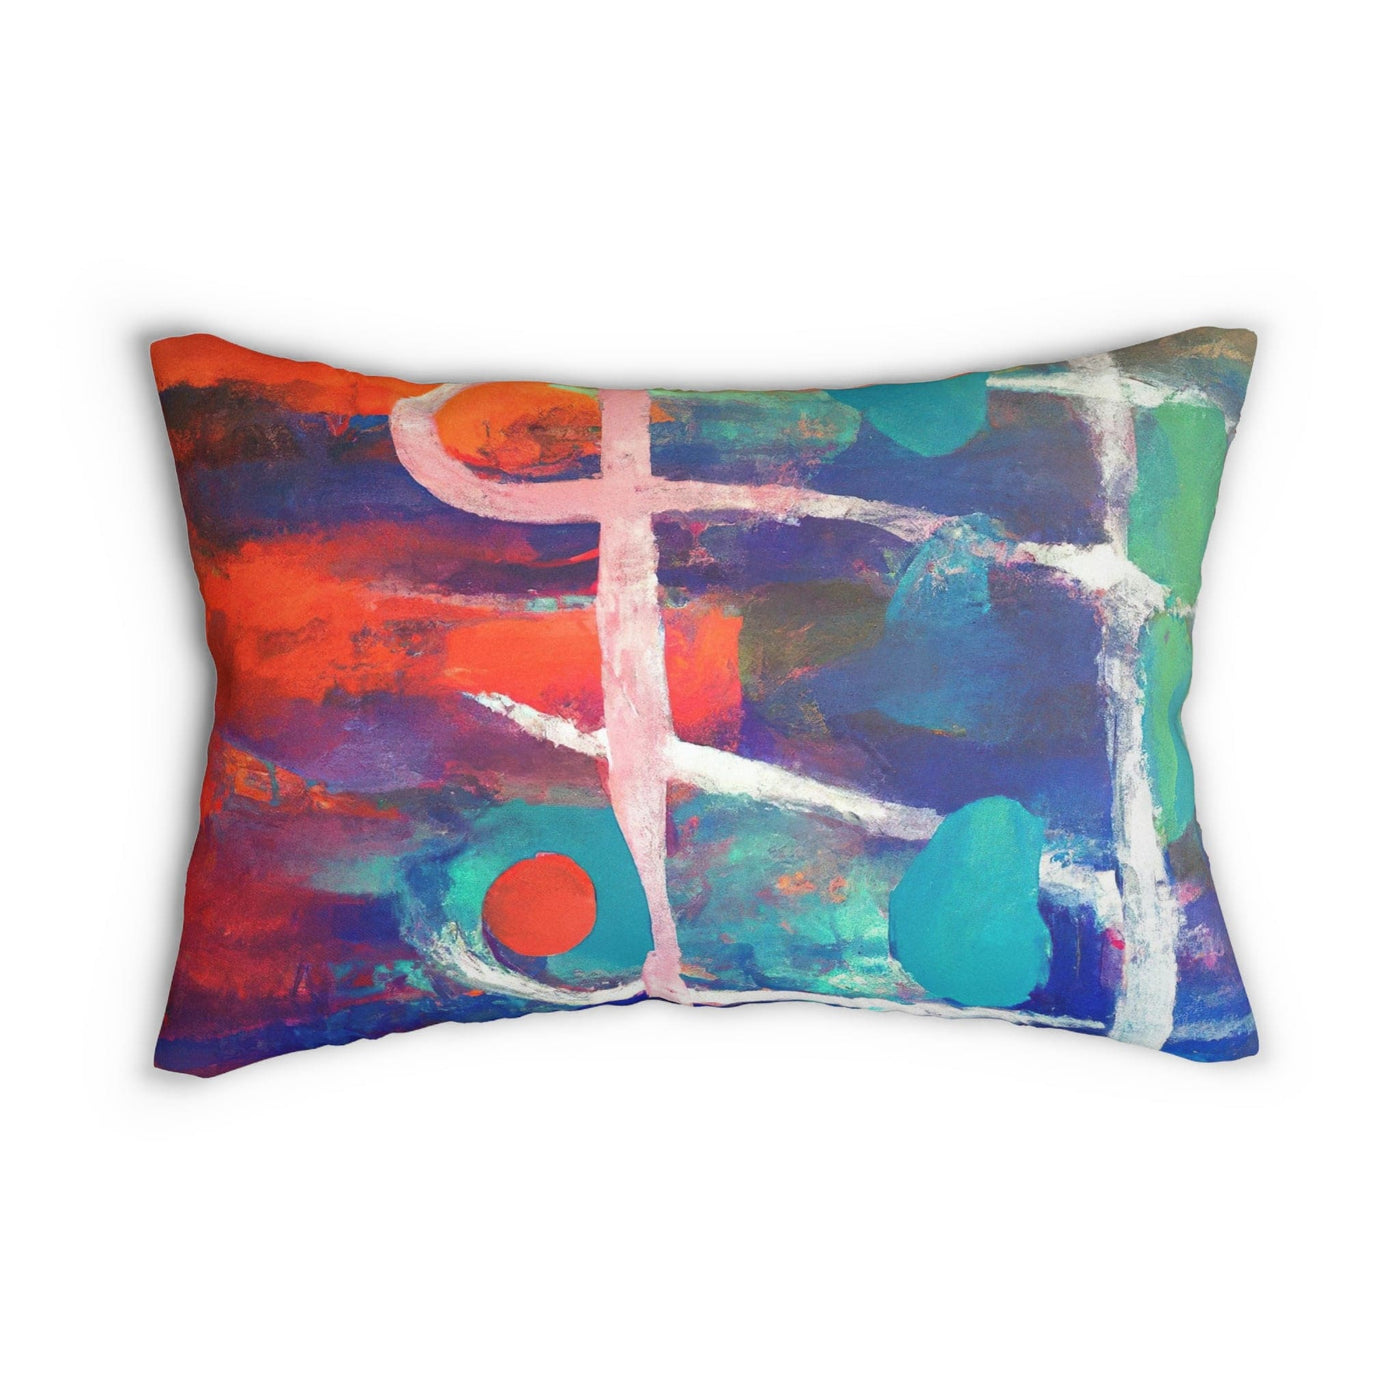 Decorative Lumbar Throw Pillow - Multicolor Abstract Expression Pattern